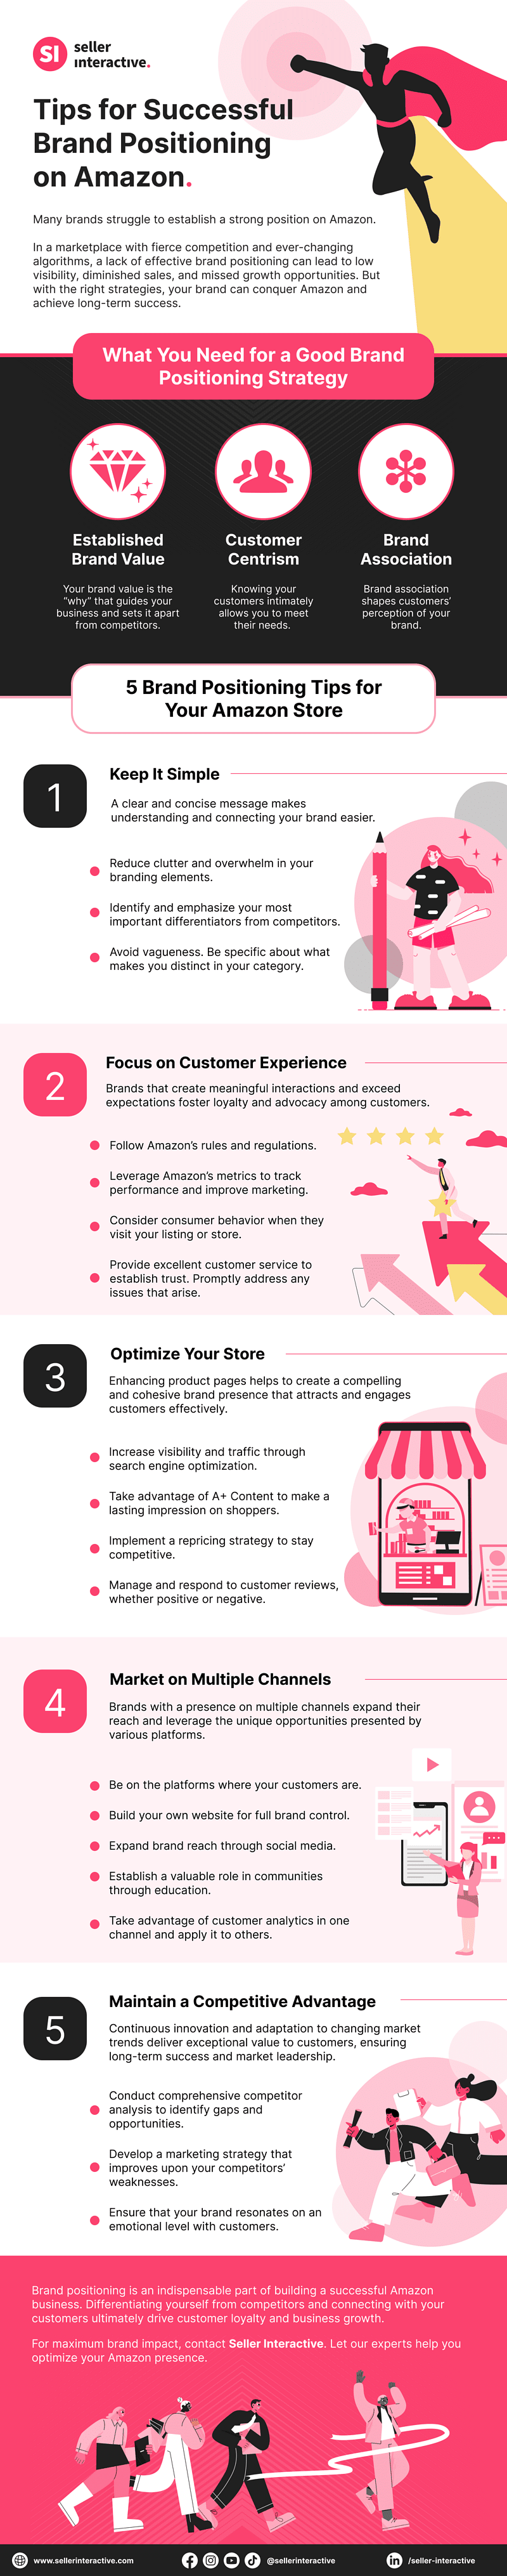 An infographic sharing five tips for successful amazon positioning: keep it simple, focus on customer experience, optimize your store, market on multiple channels, and maintain a competitive advantage